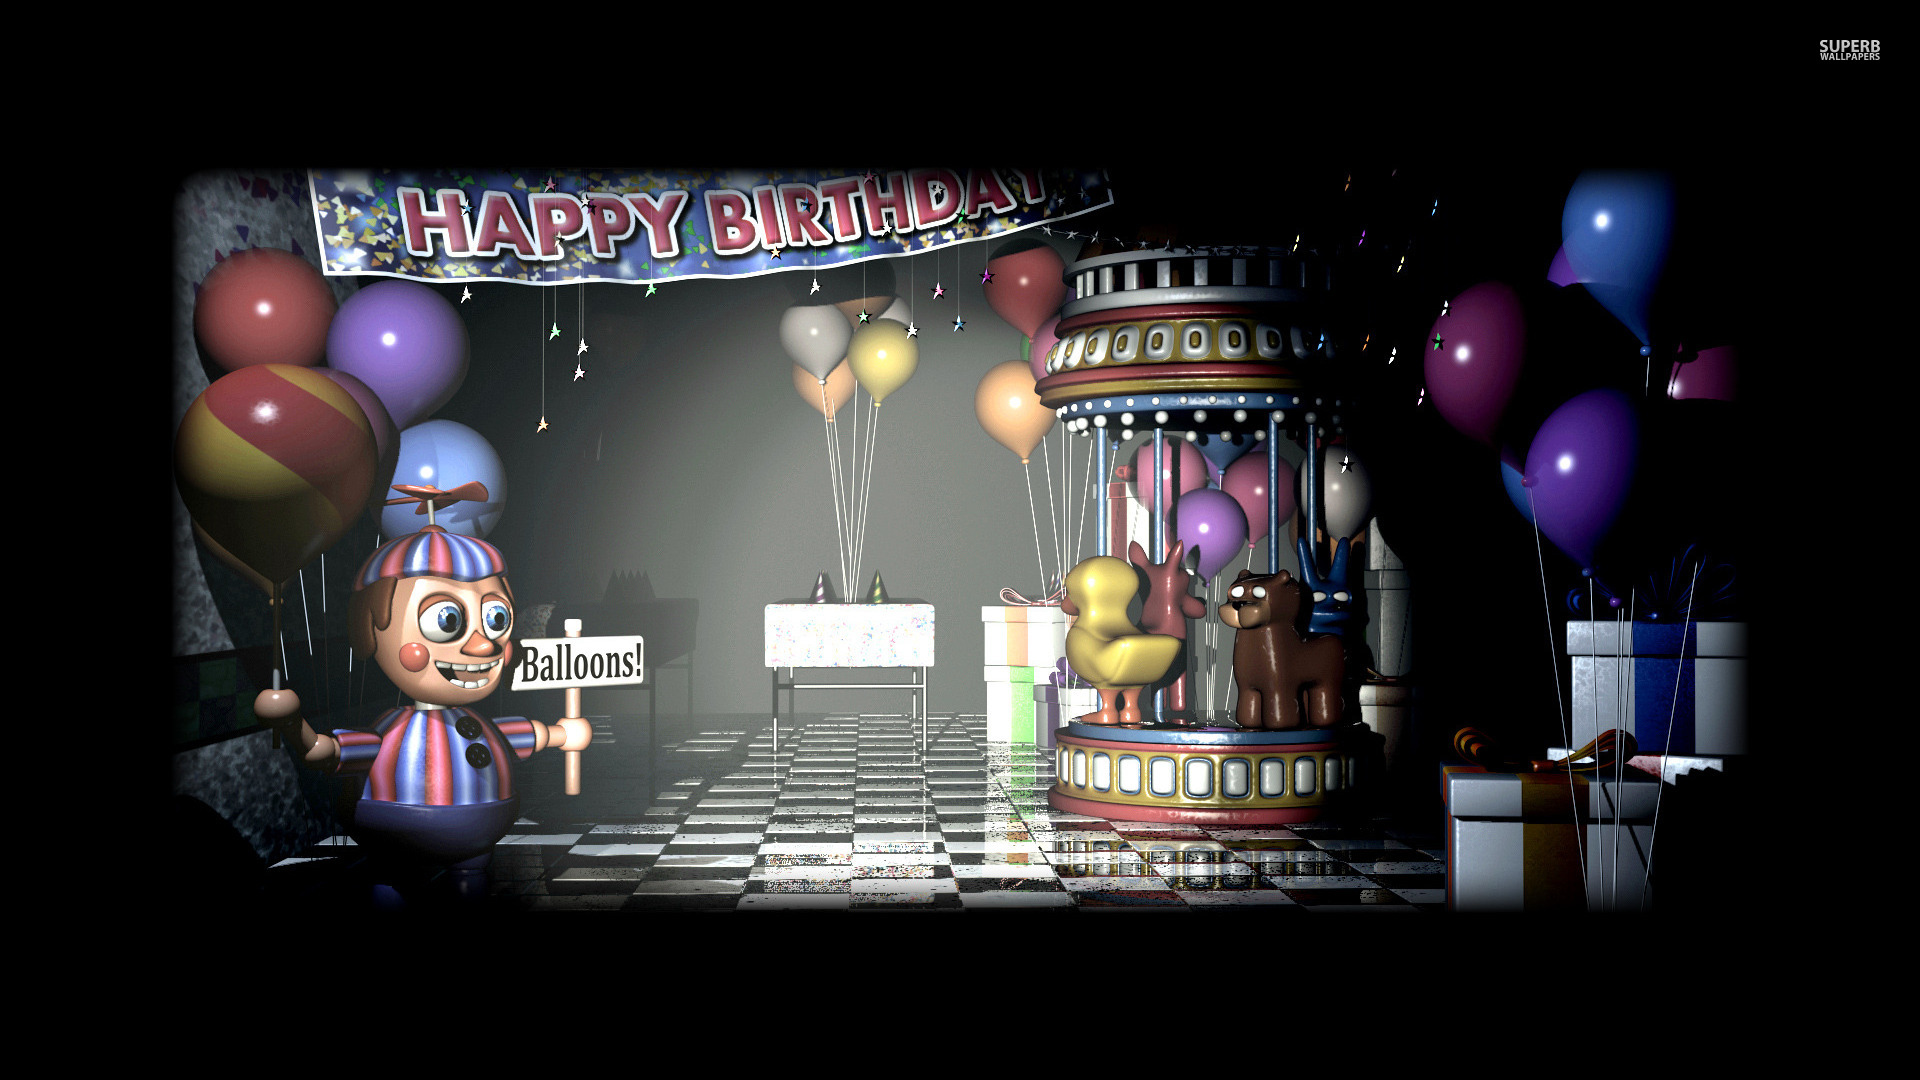 download free four nights at freddy